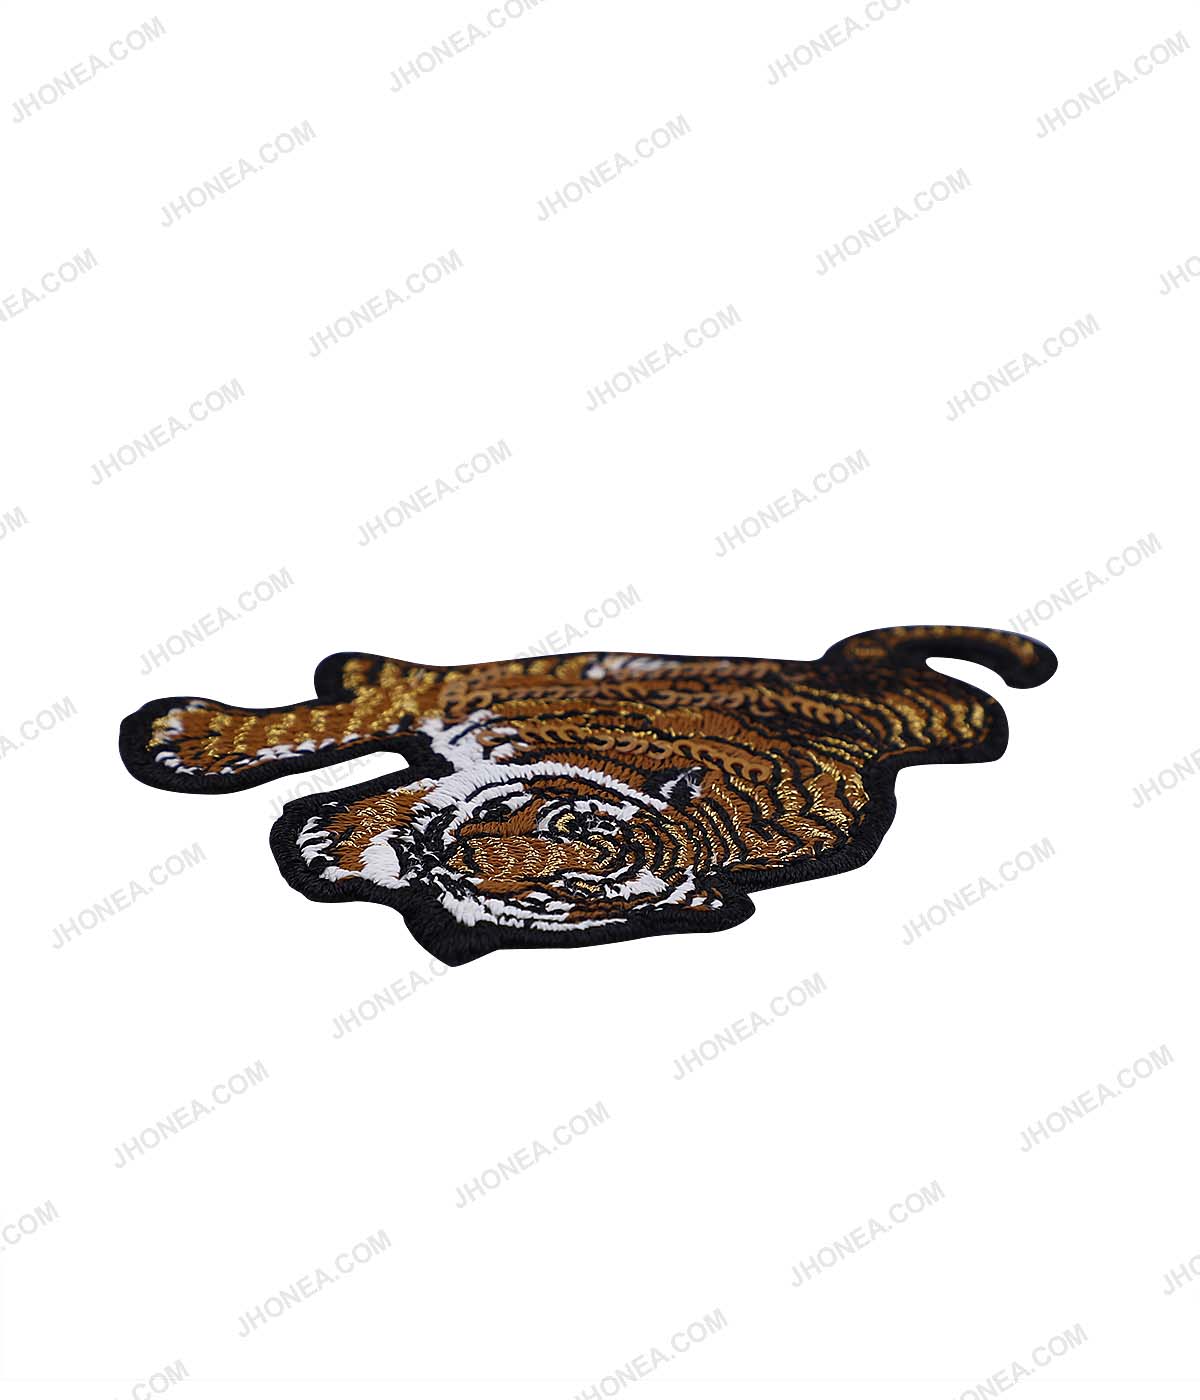 Cute Climbing Tiger Gold Embroidered Sequins Patch